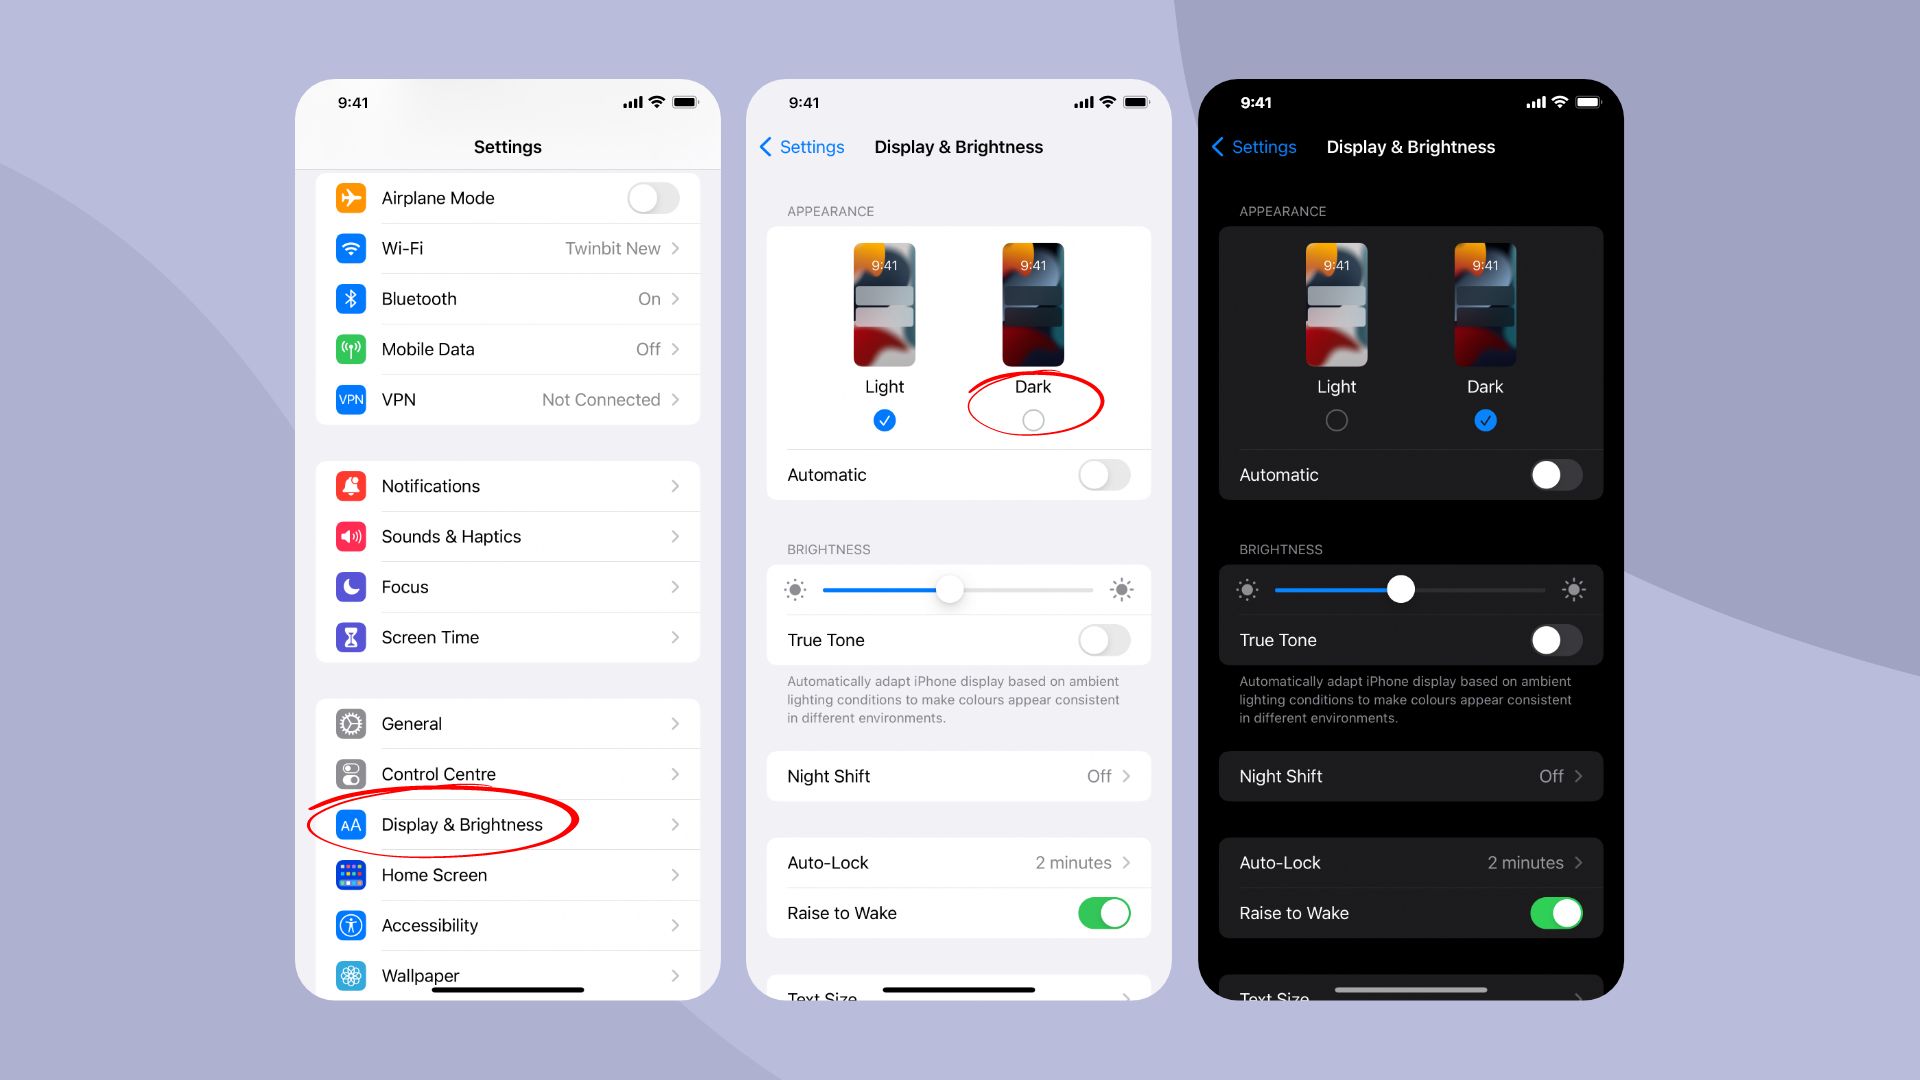 How to change keyboard on iPhone with dark mode